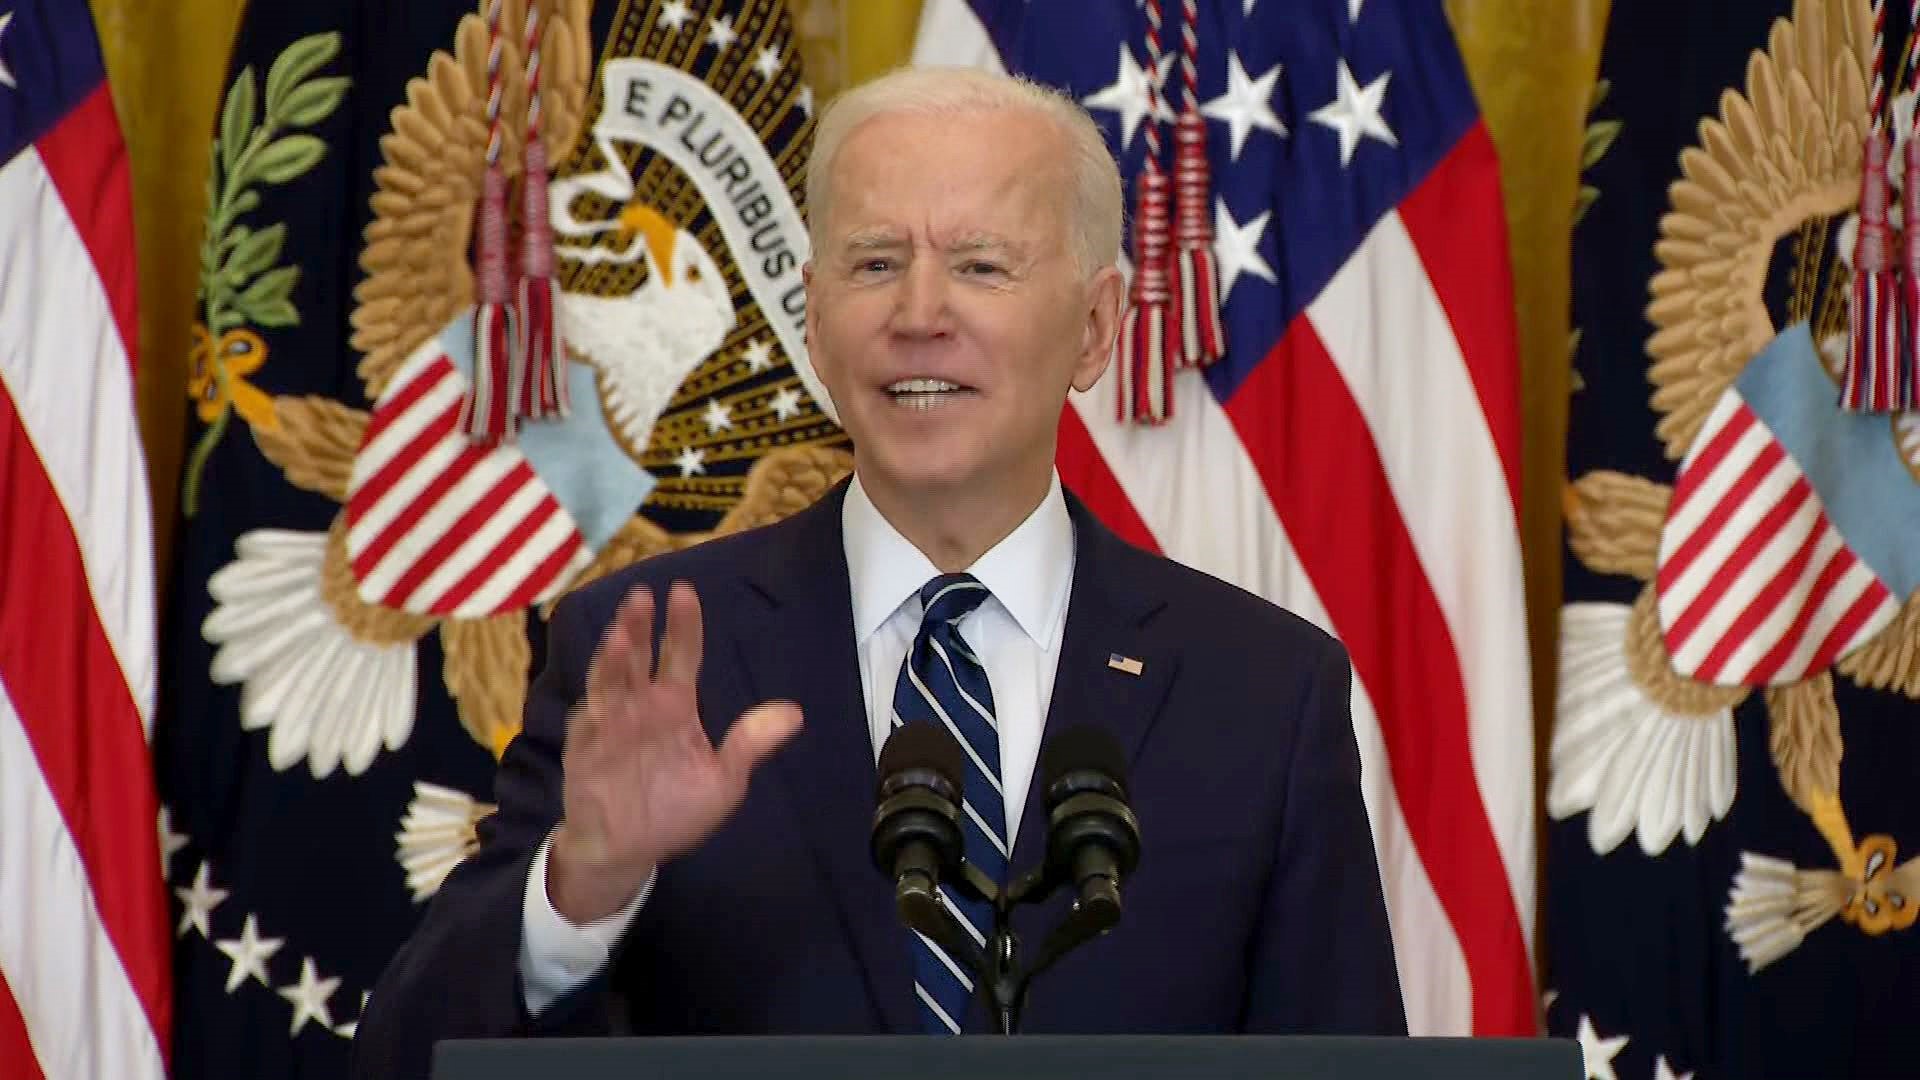 President Joe Biden says it's his “expectation” that he'll run for reelection in 2024.